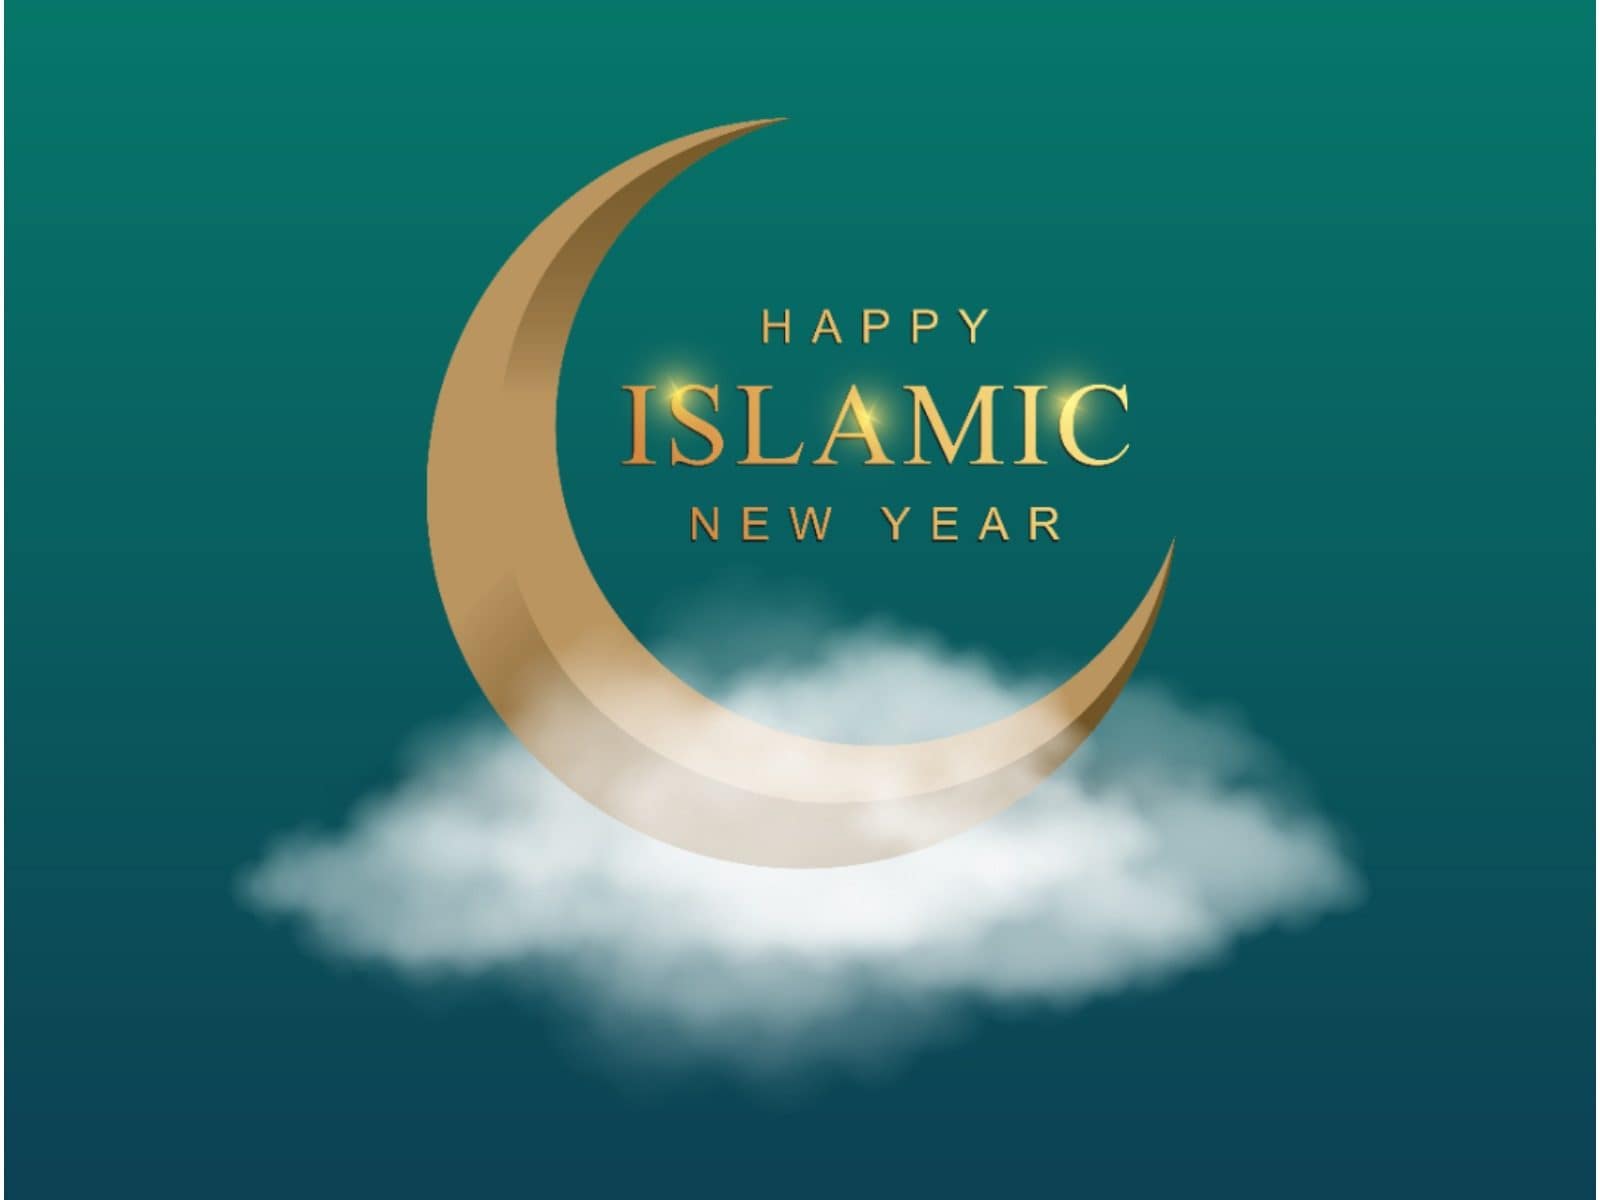 Happy Islamic New Year 2021: Image, Wishes, Quotes, Messages and WhatsApp Greetings to Share on Hijri New Year 1443